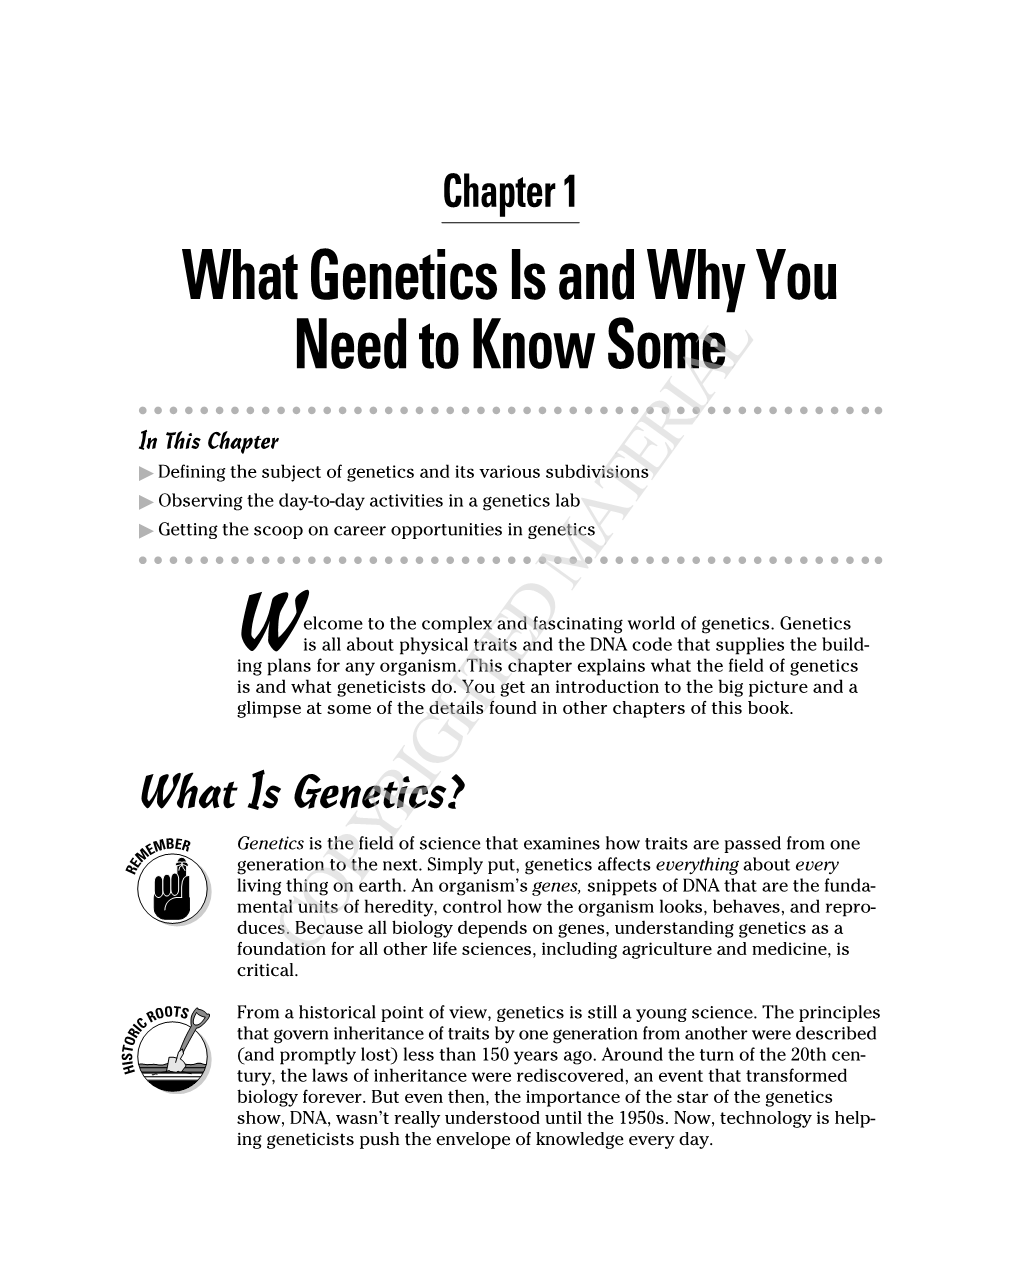 What Genetics Is and Why You Need to Know Some